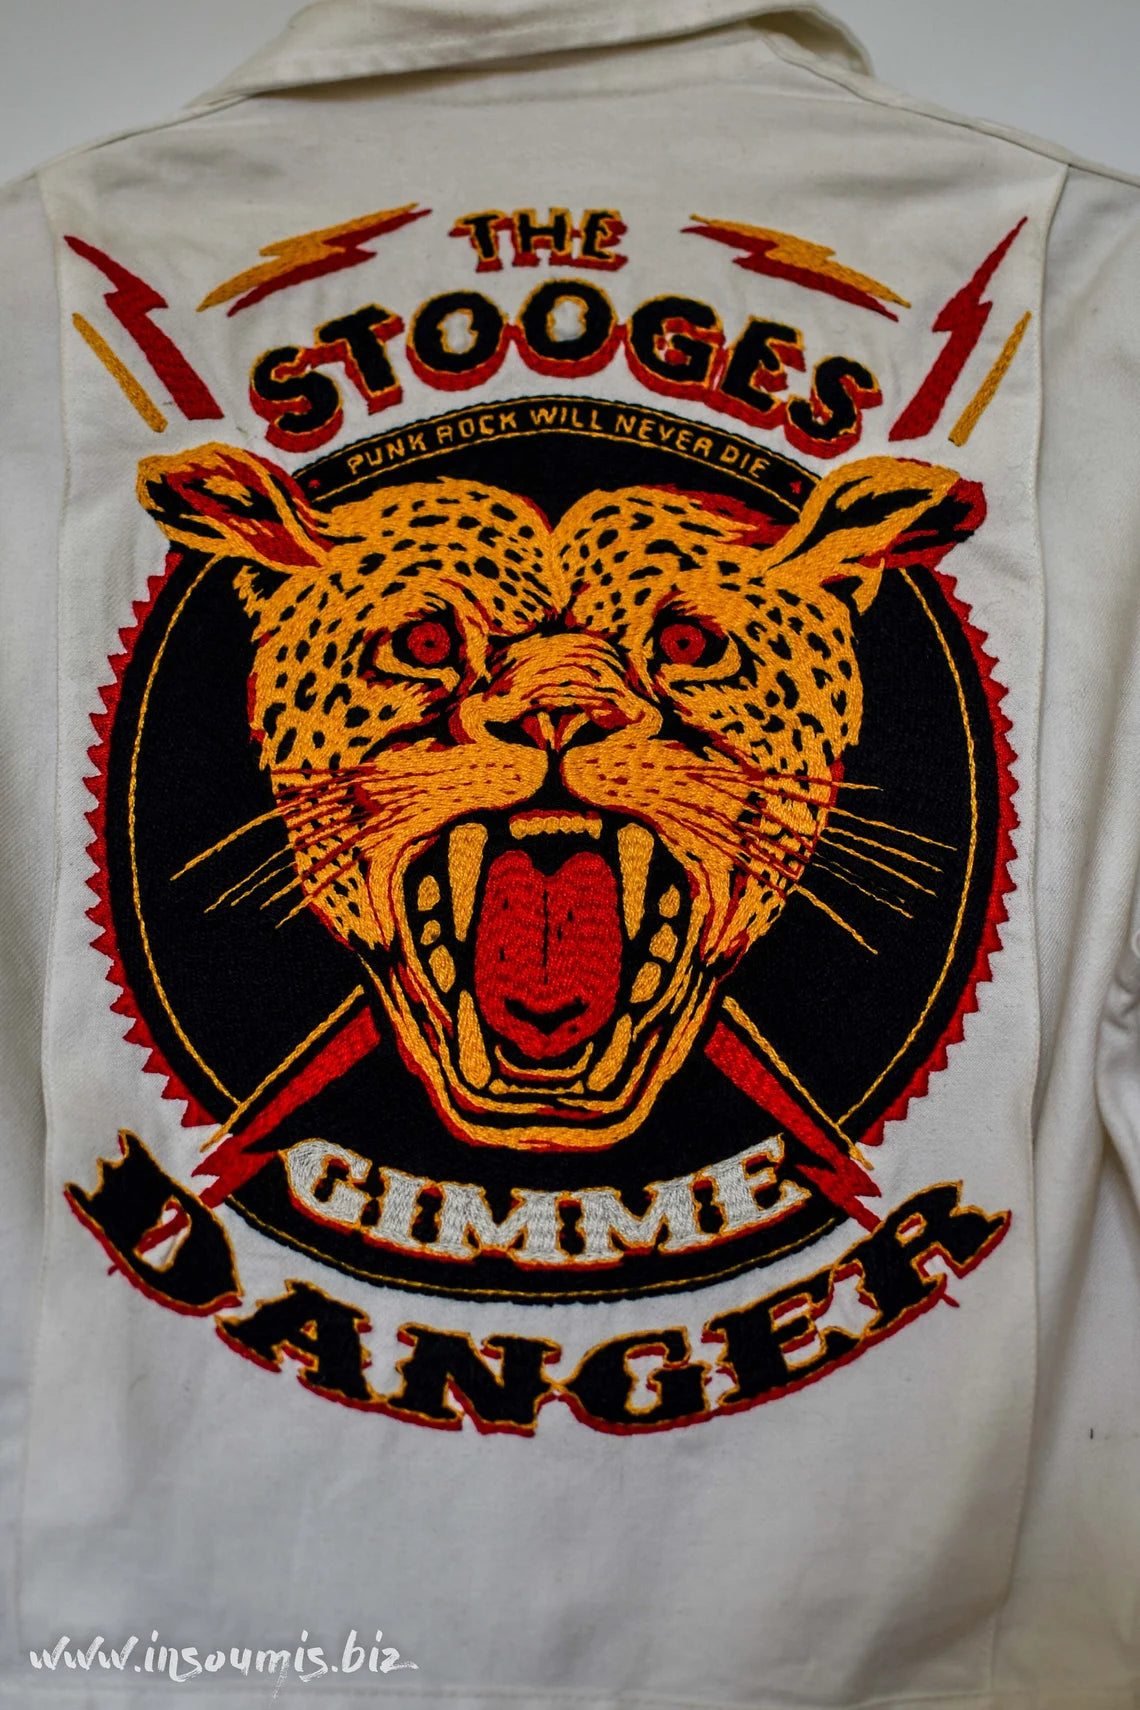 White coverall hand embroidery chainstitch The Stooges/ combinaison blanche brodée points de chaînette